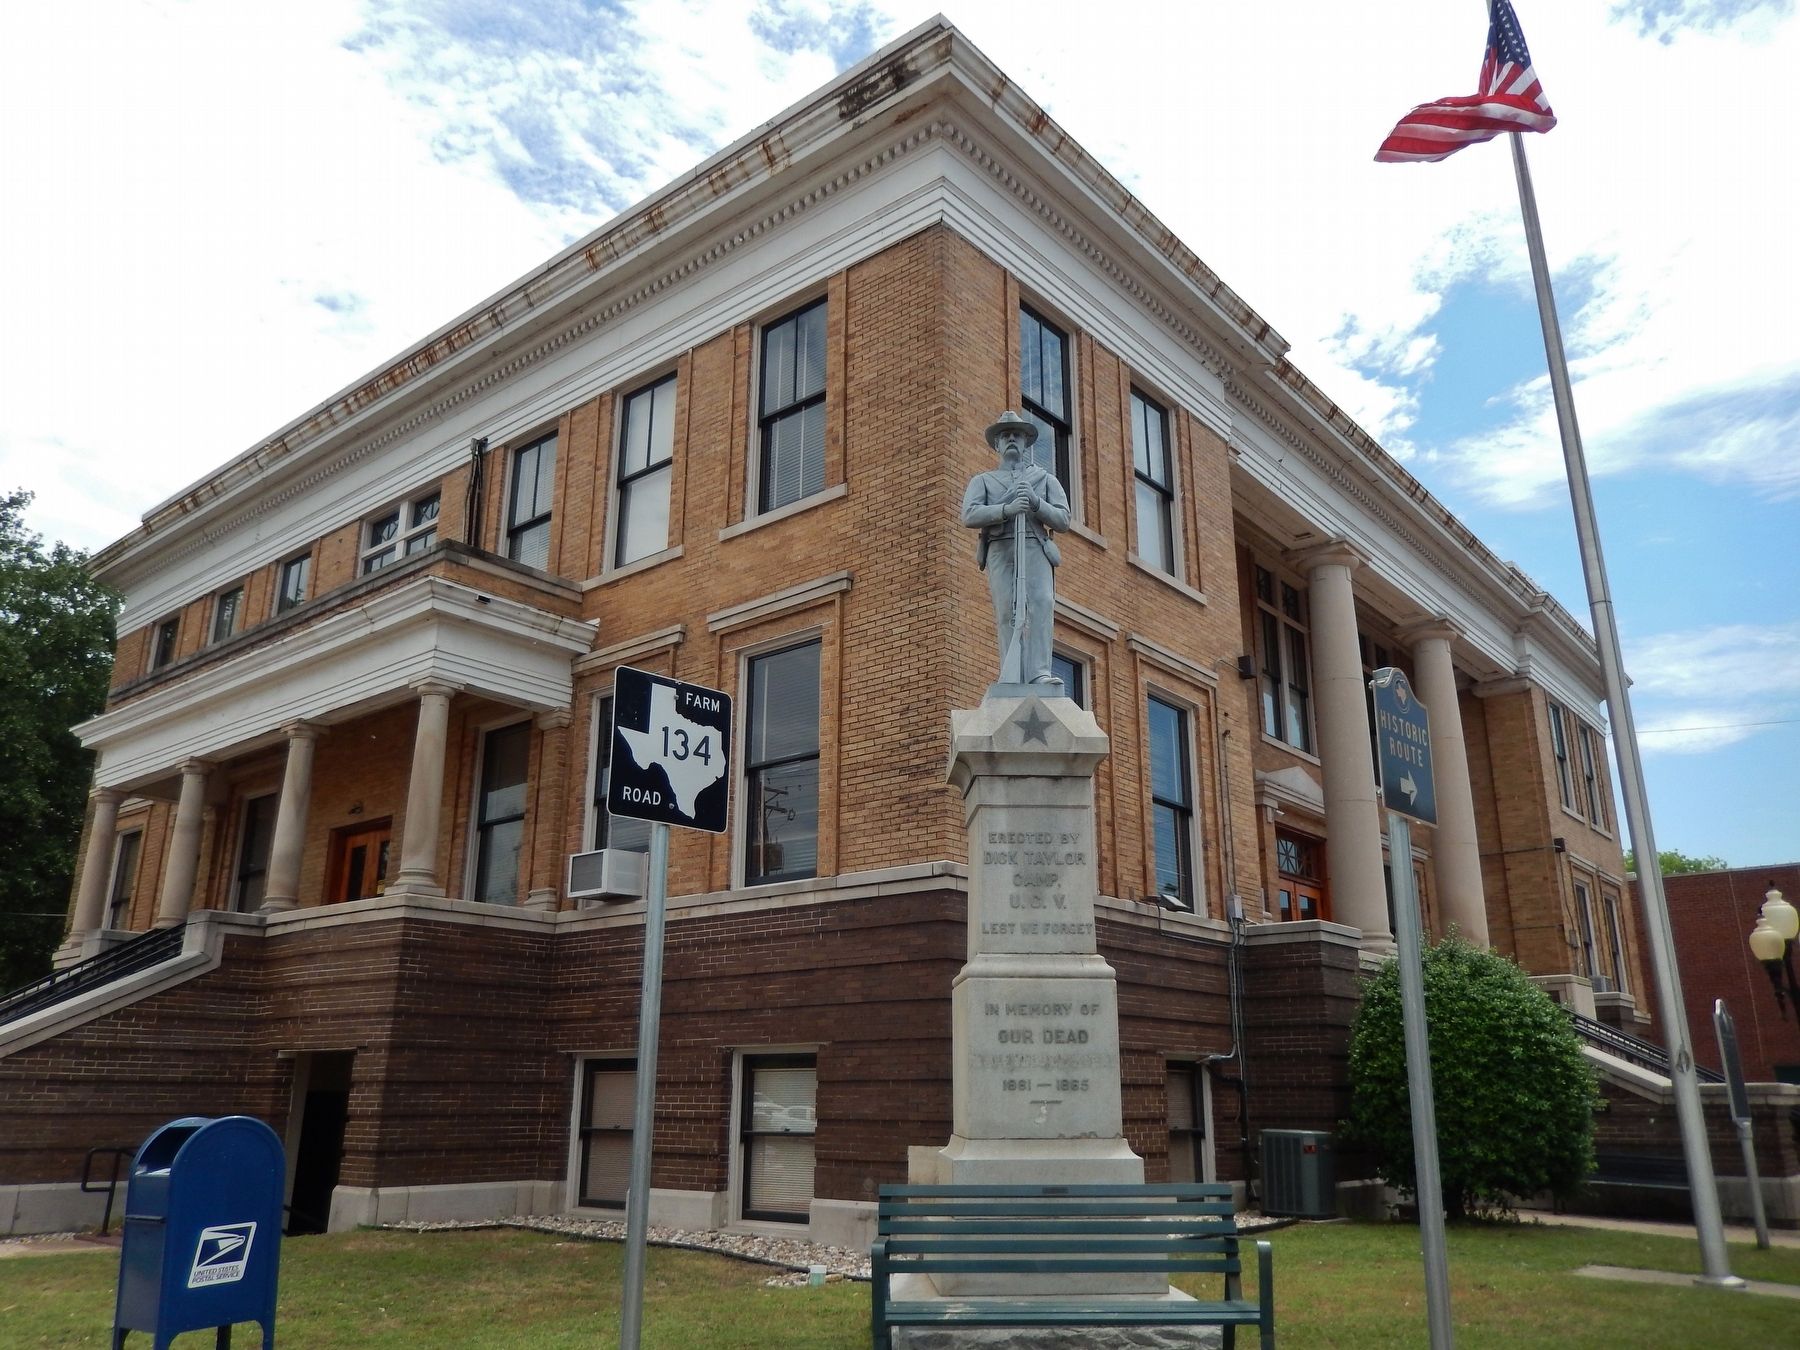 Marion County Courthouse image. Click for full size.